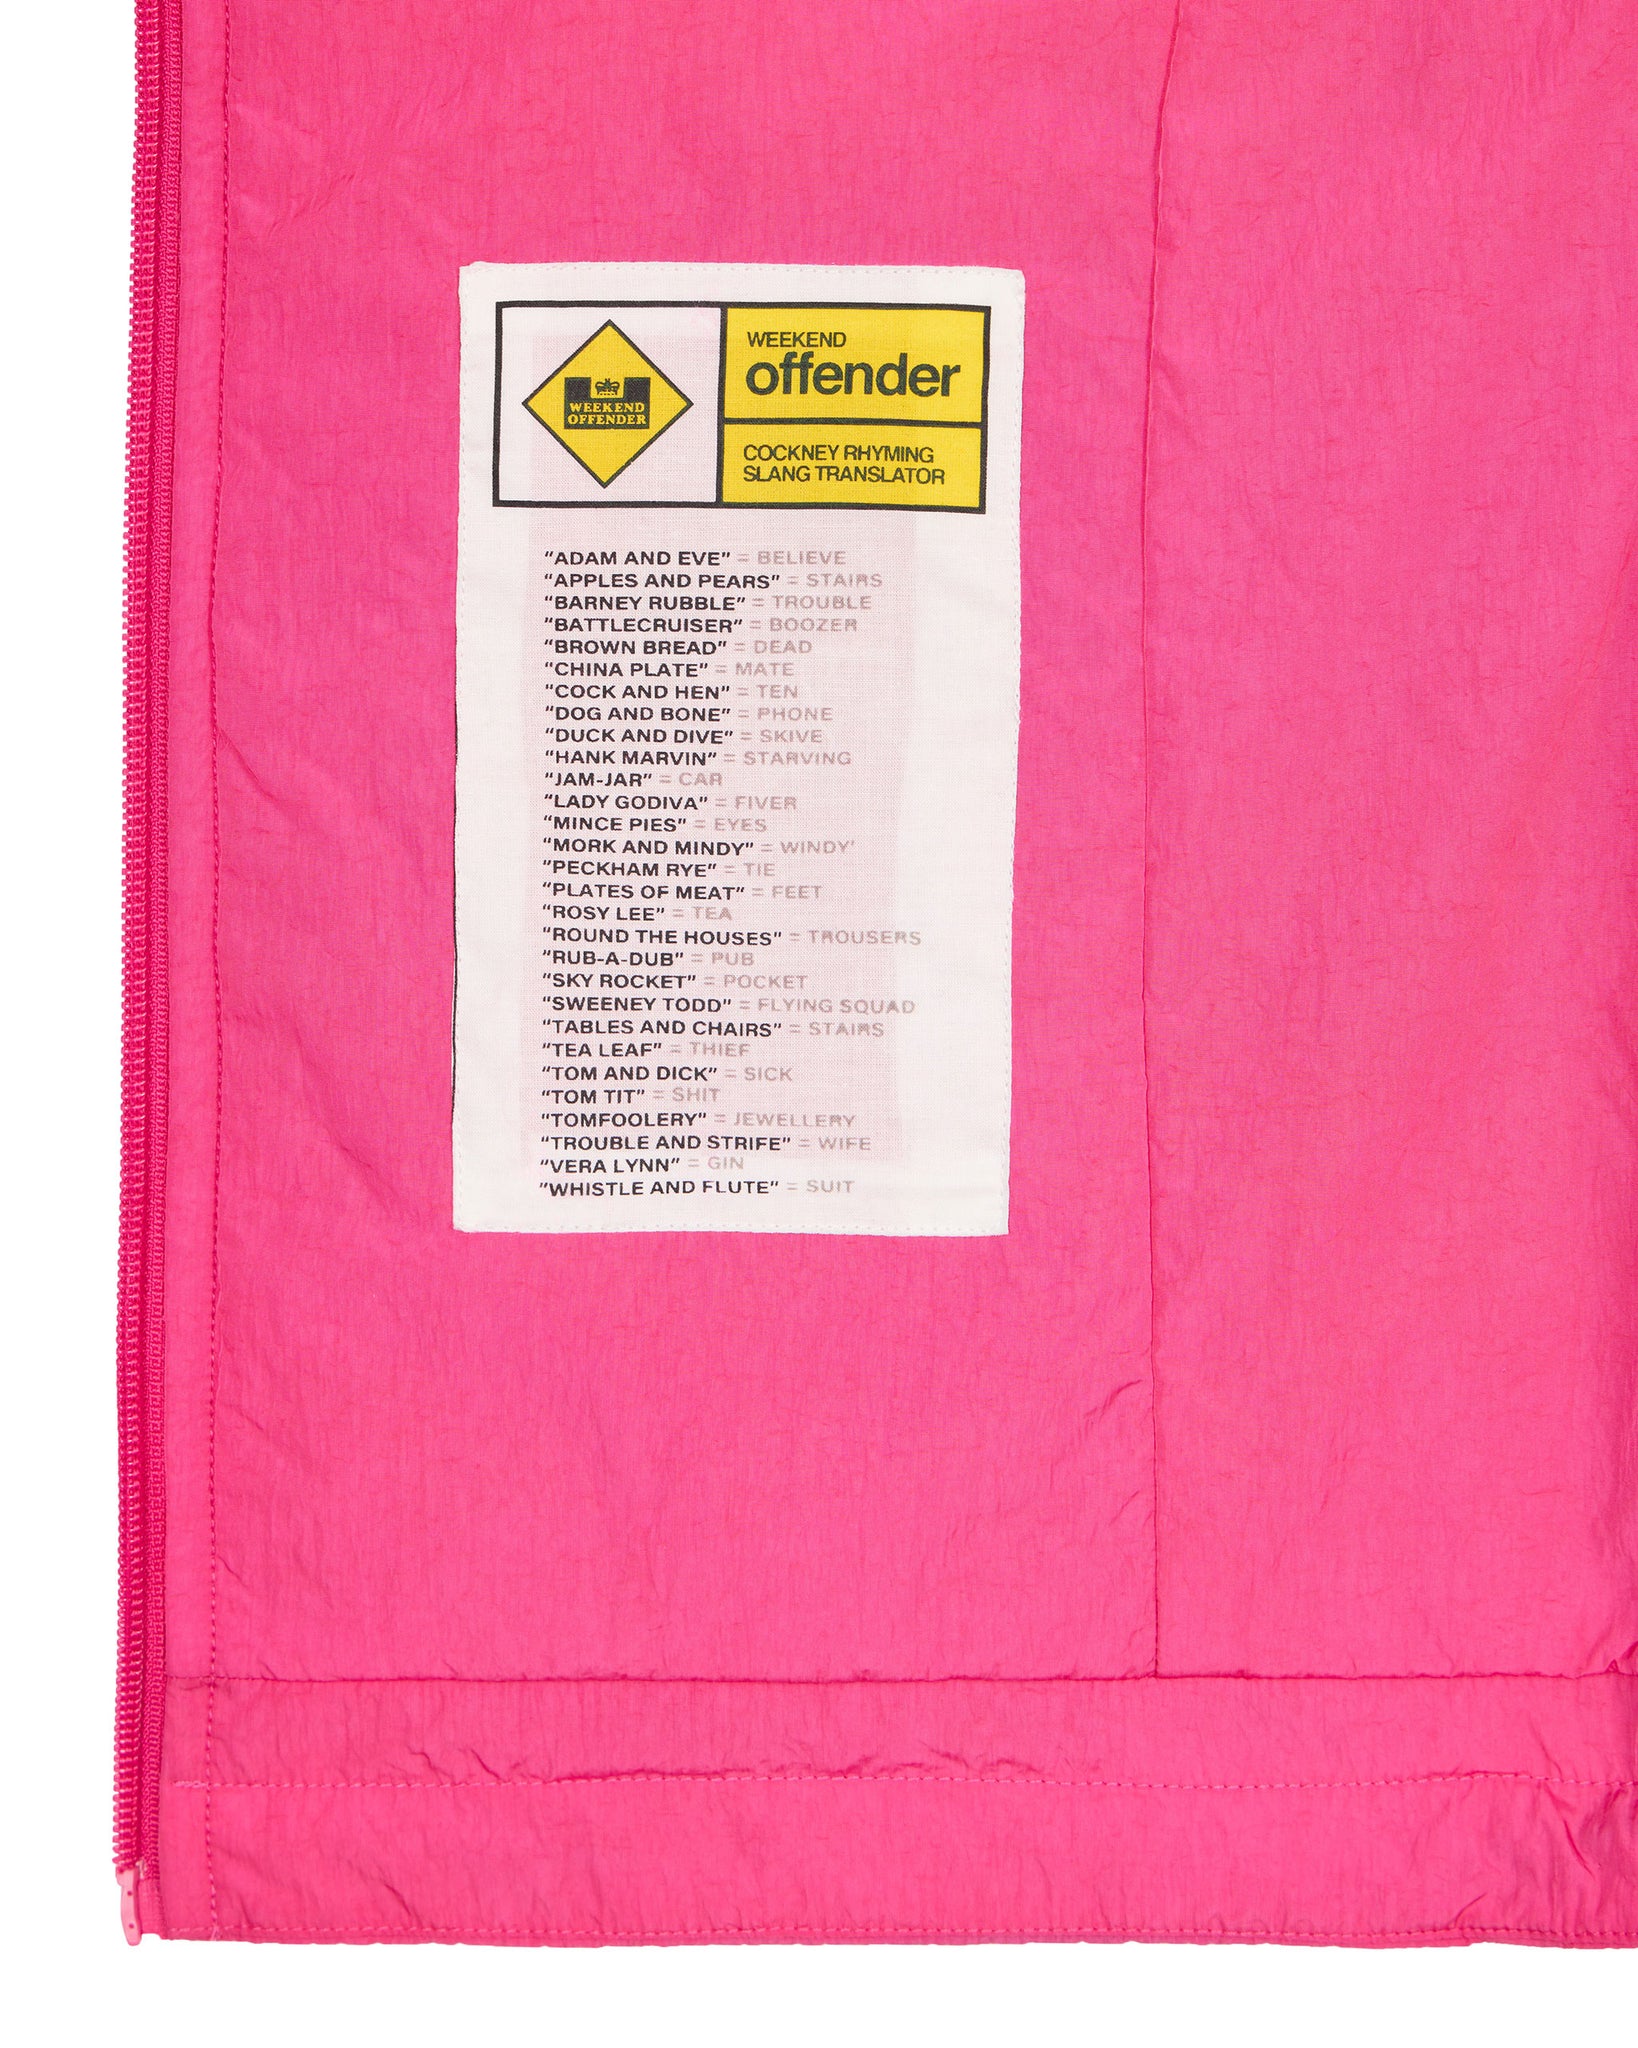 Technician Thermo Jacket Cerise Pink